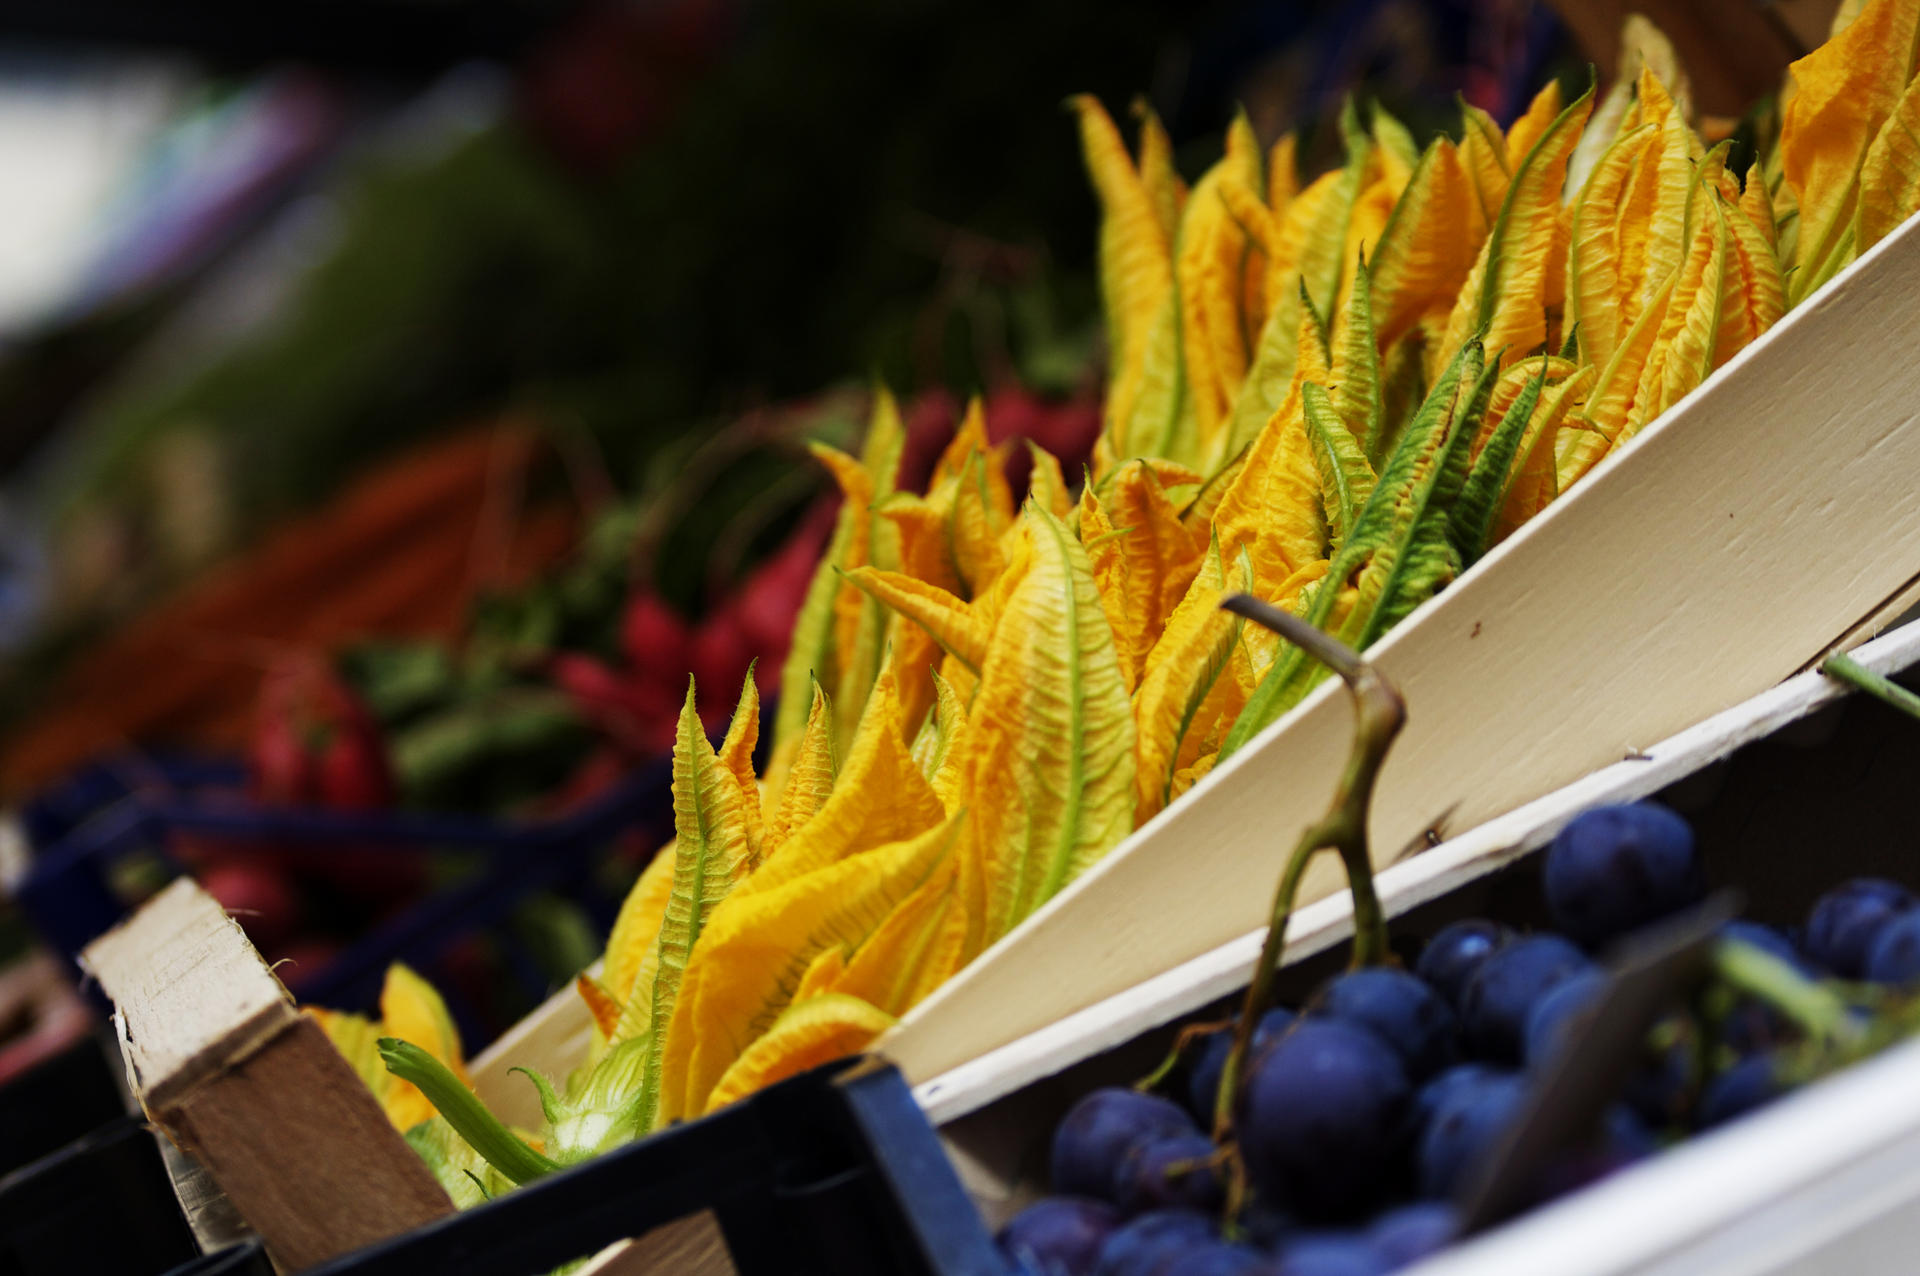 The produce in Umbrian markets is full of flavour and colour. Photos: Debbie Oakes